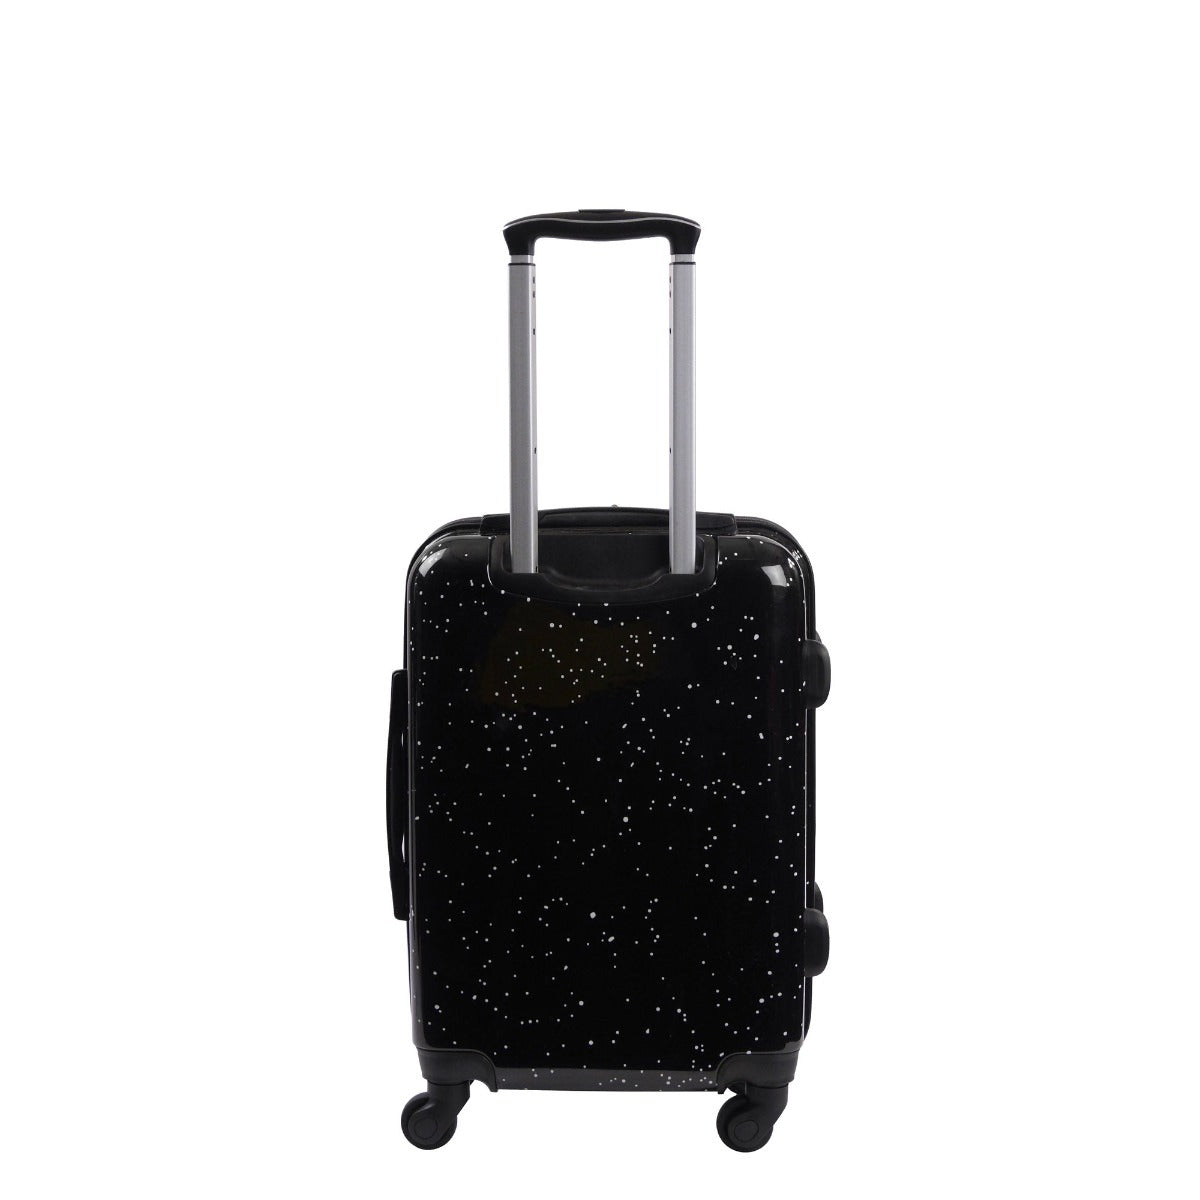 Ful Space Jam 21 inch carry on hardside spinner luggage - best suitcase for traveling